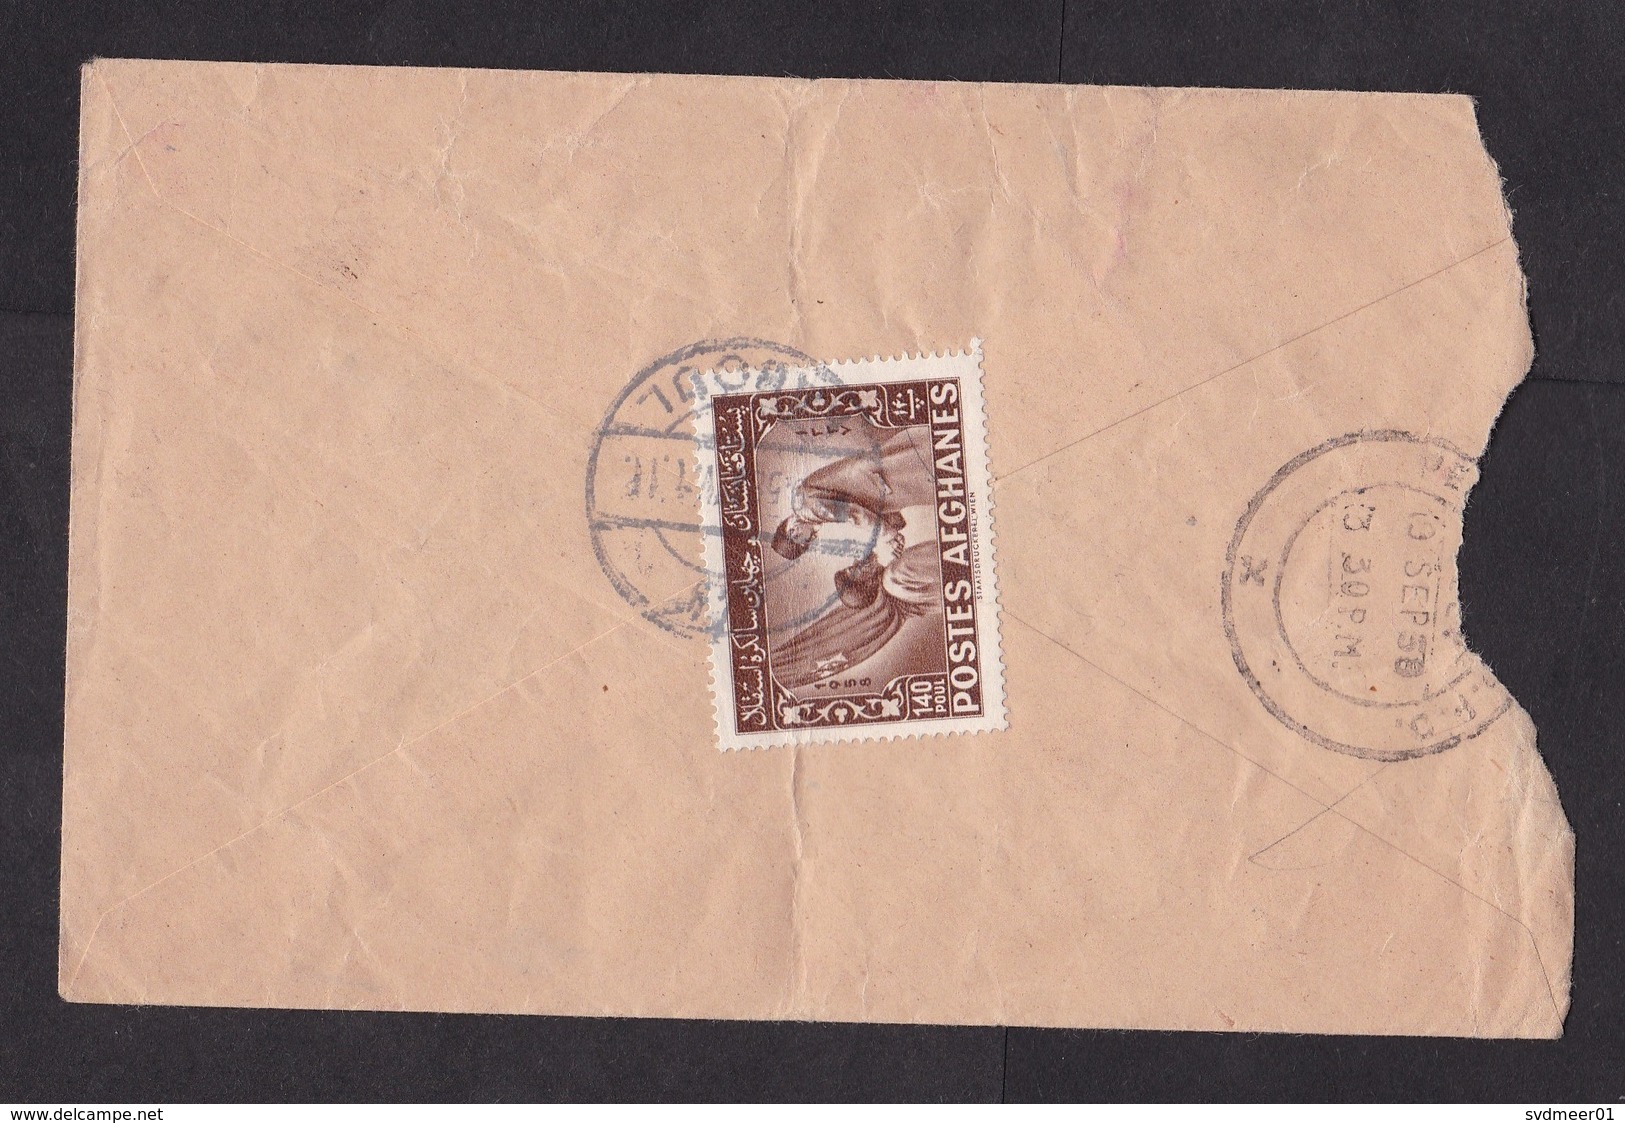 Afghanistan: Cover To Pakistan, 1958, 1 Stamp, Child, Rare Real Use (damaged) - Afganistán